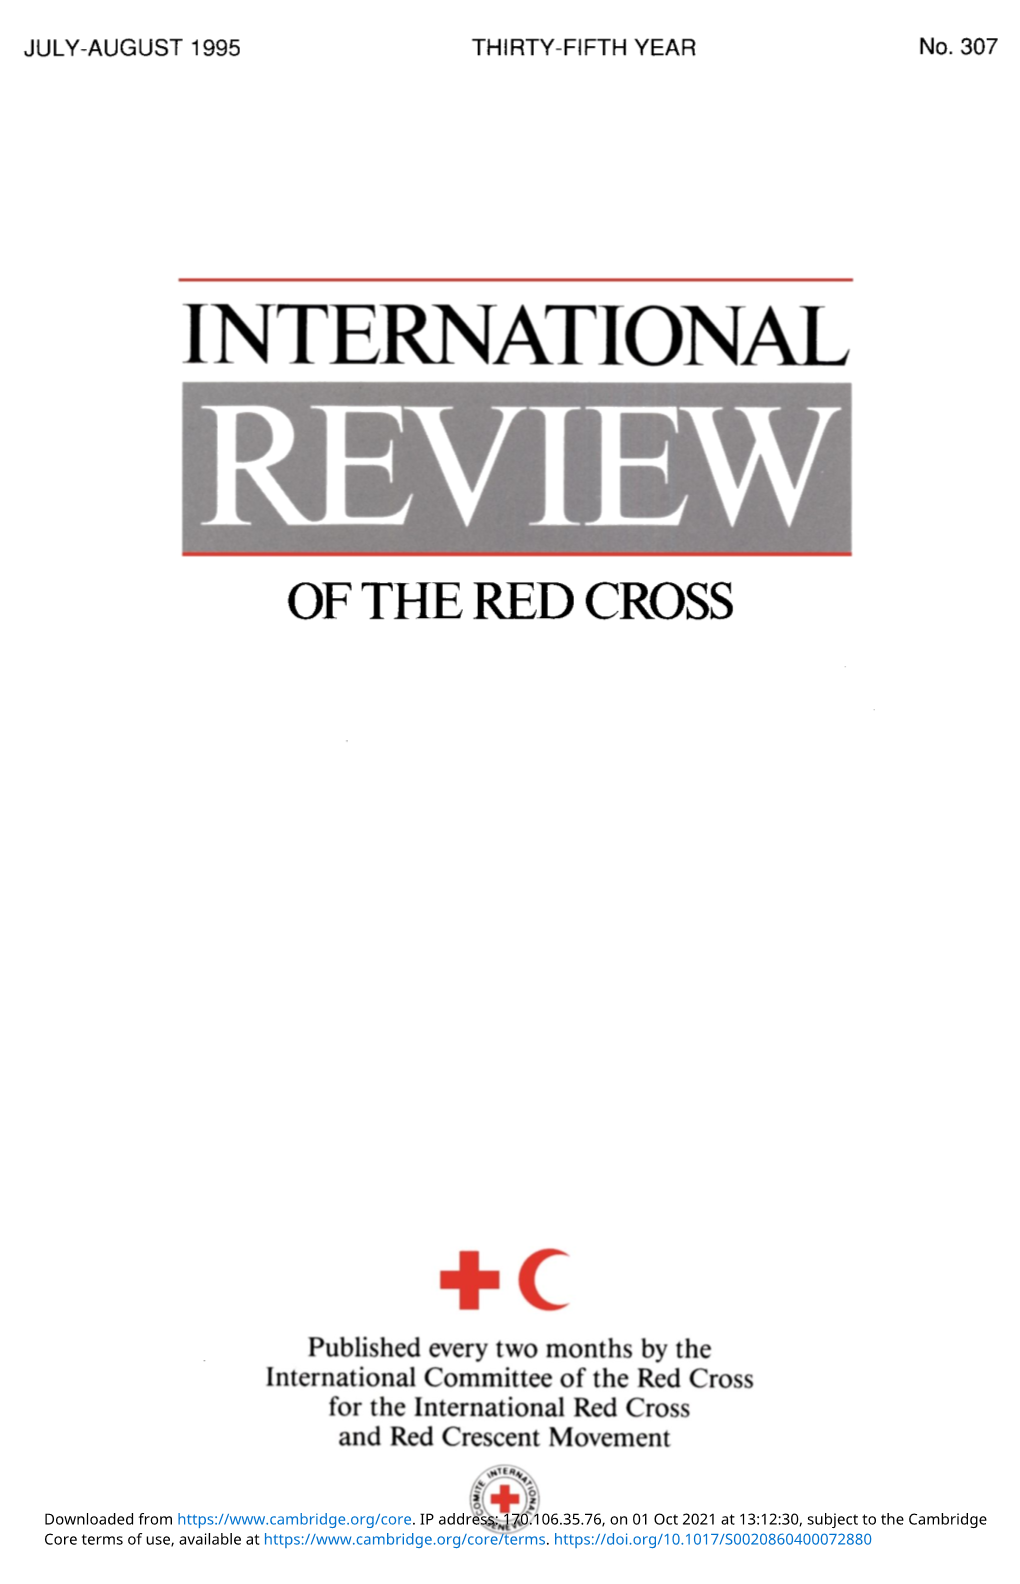 International View of the Red Cross